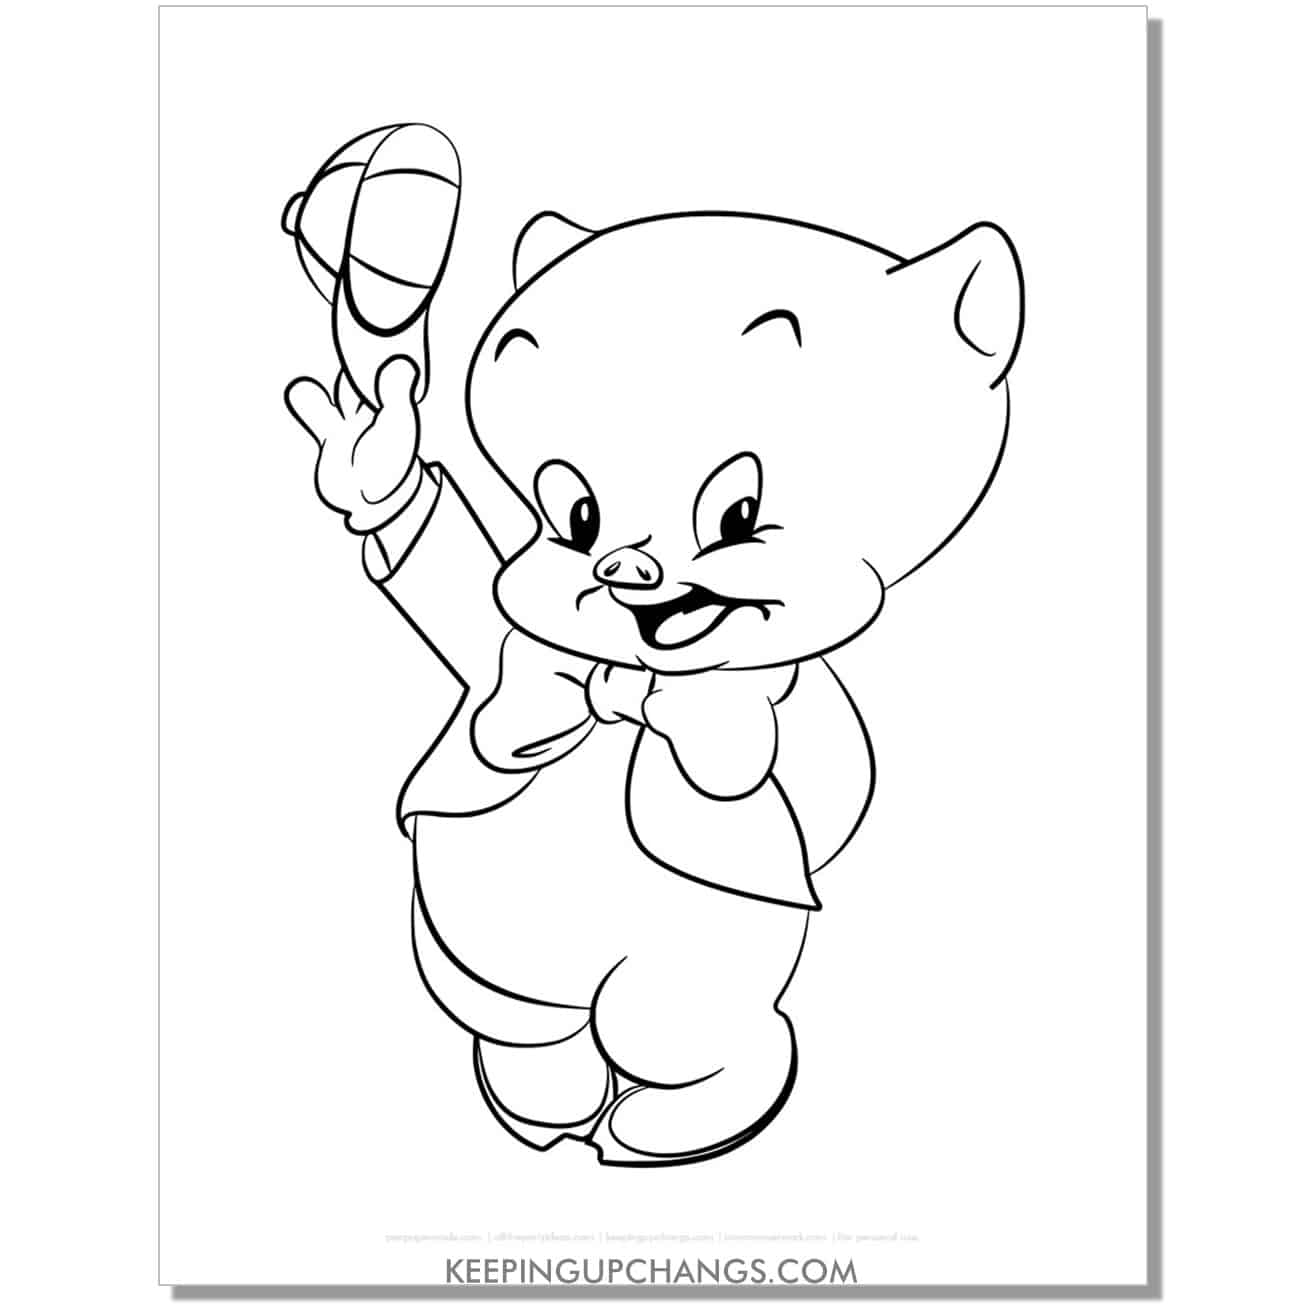 free porky pig looney tunes coloring page, sheet.